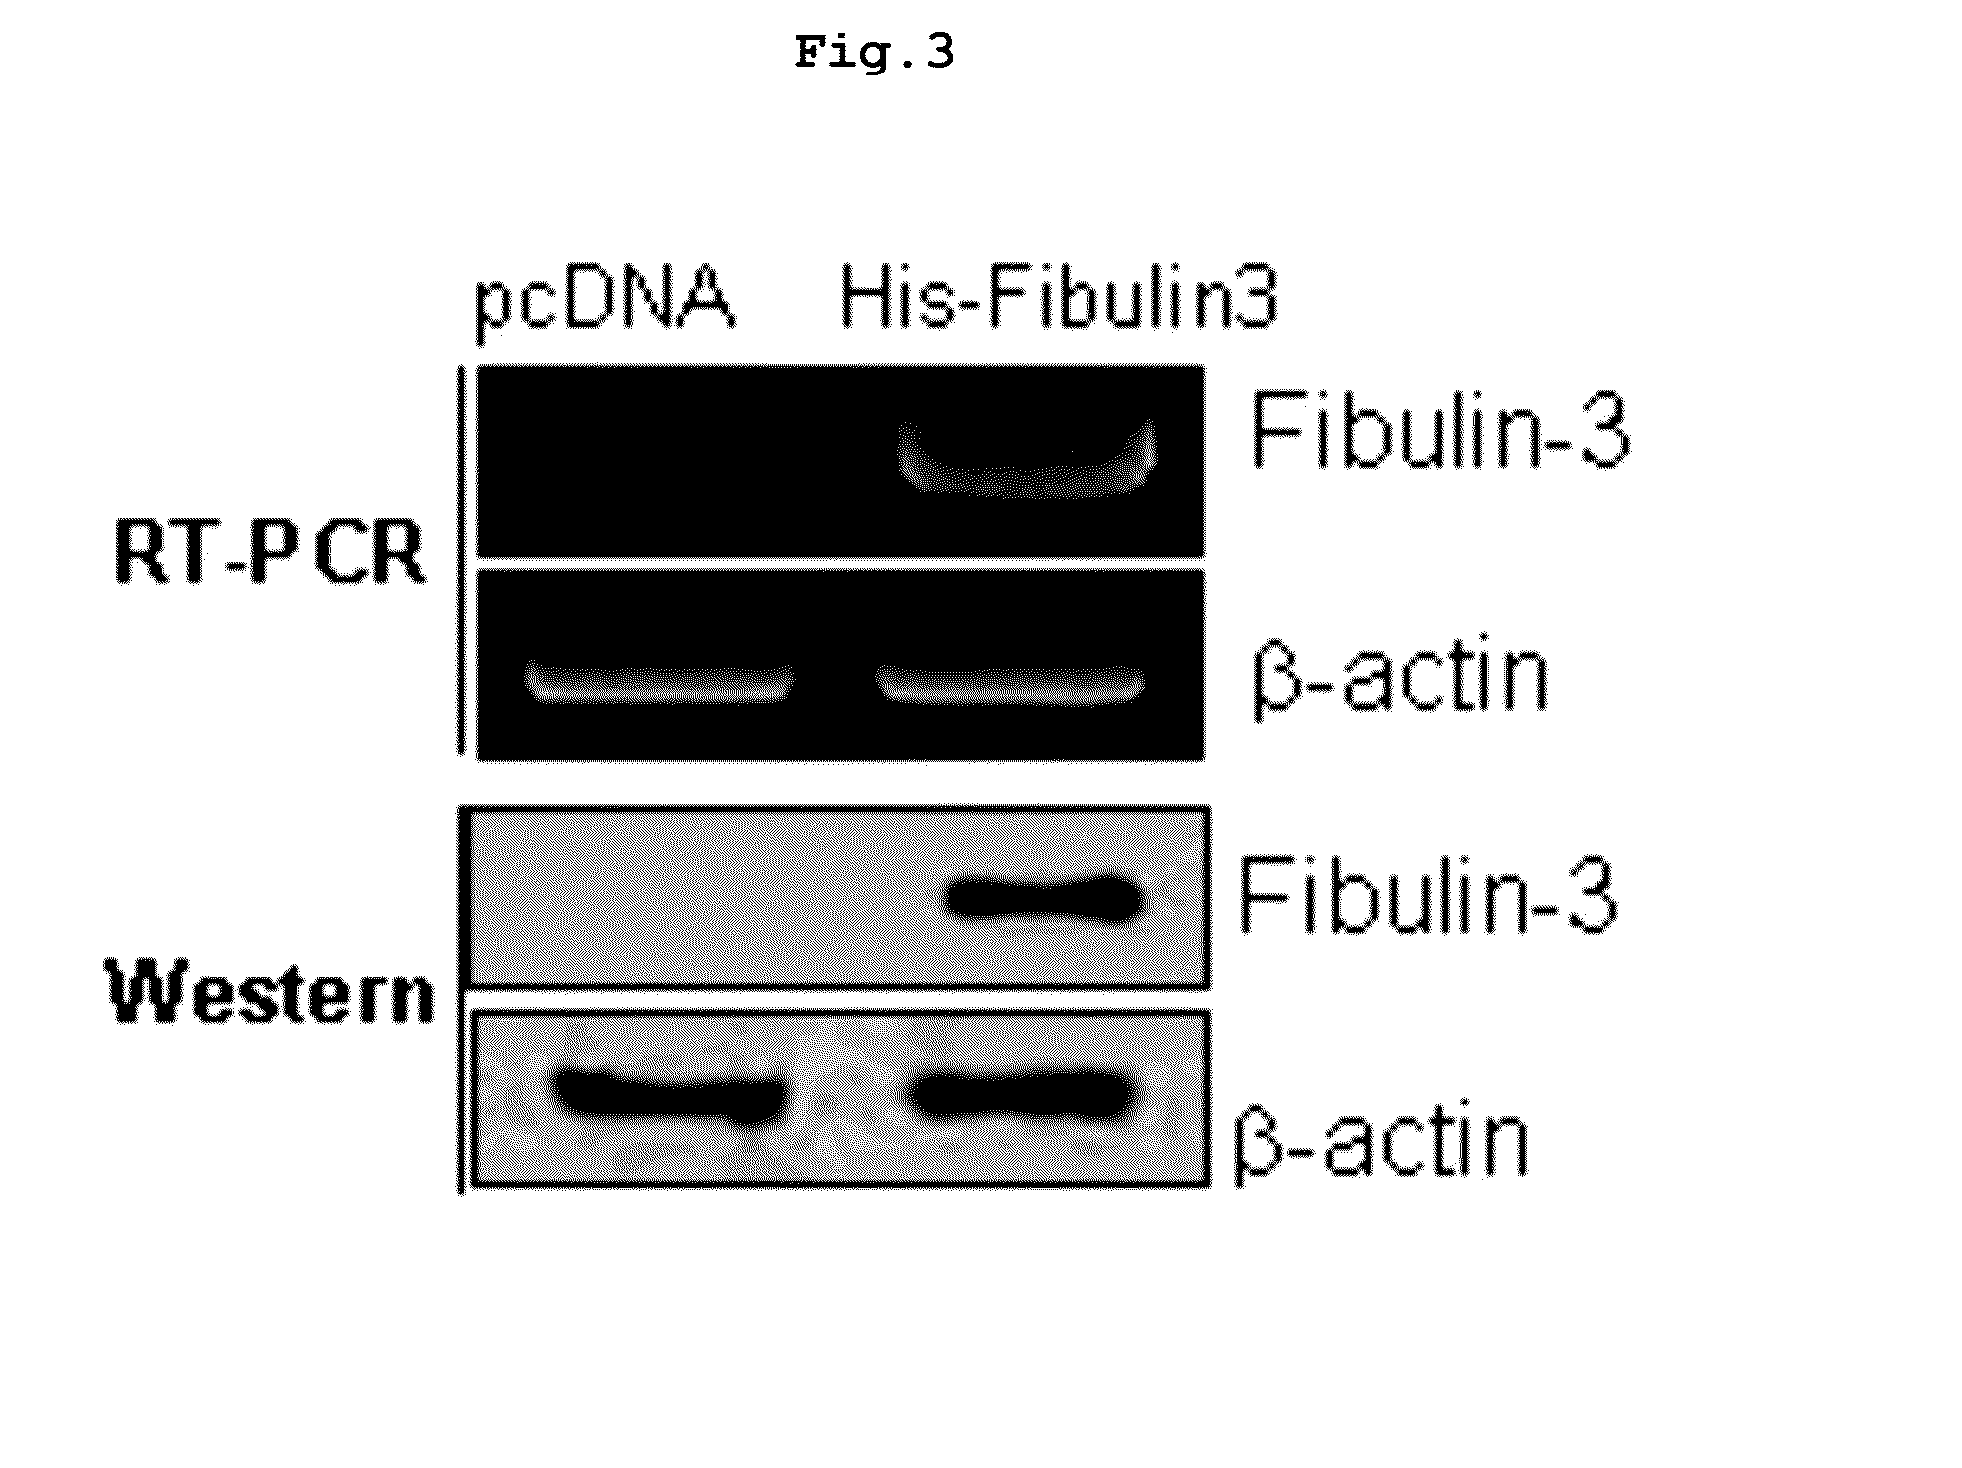 Pharmaceutical composition containing fibulin-3 protein as an active ingredient for inhibiting the growth of cancer stem cells